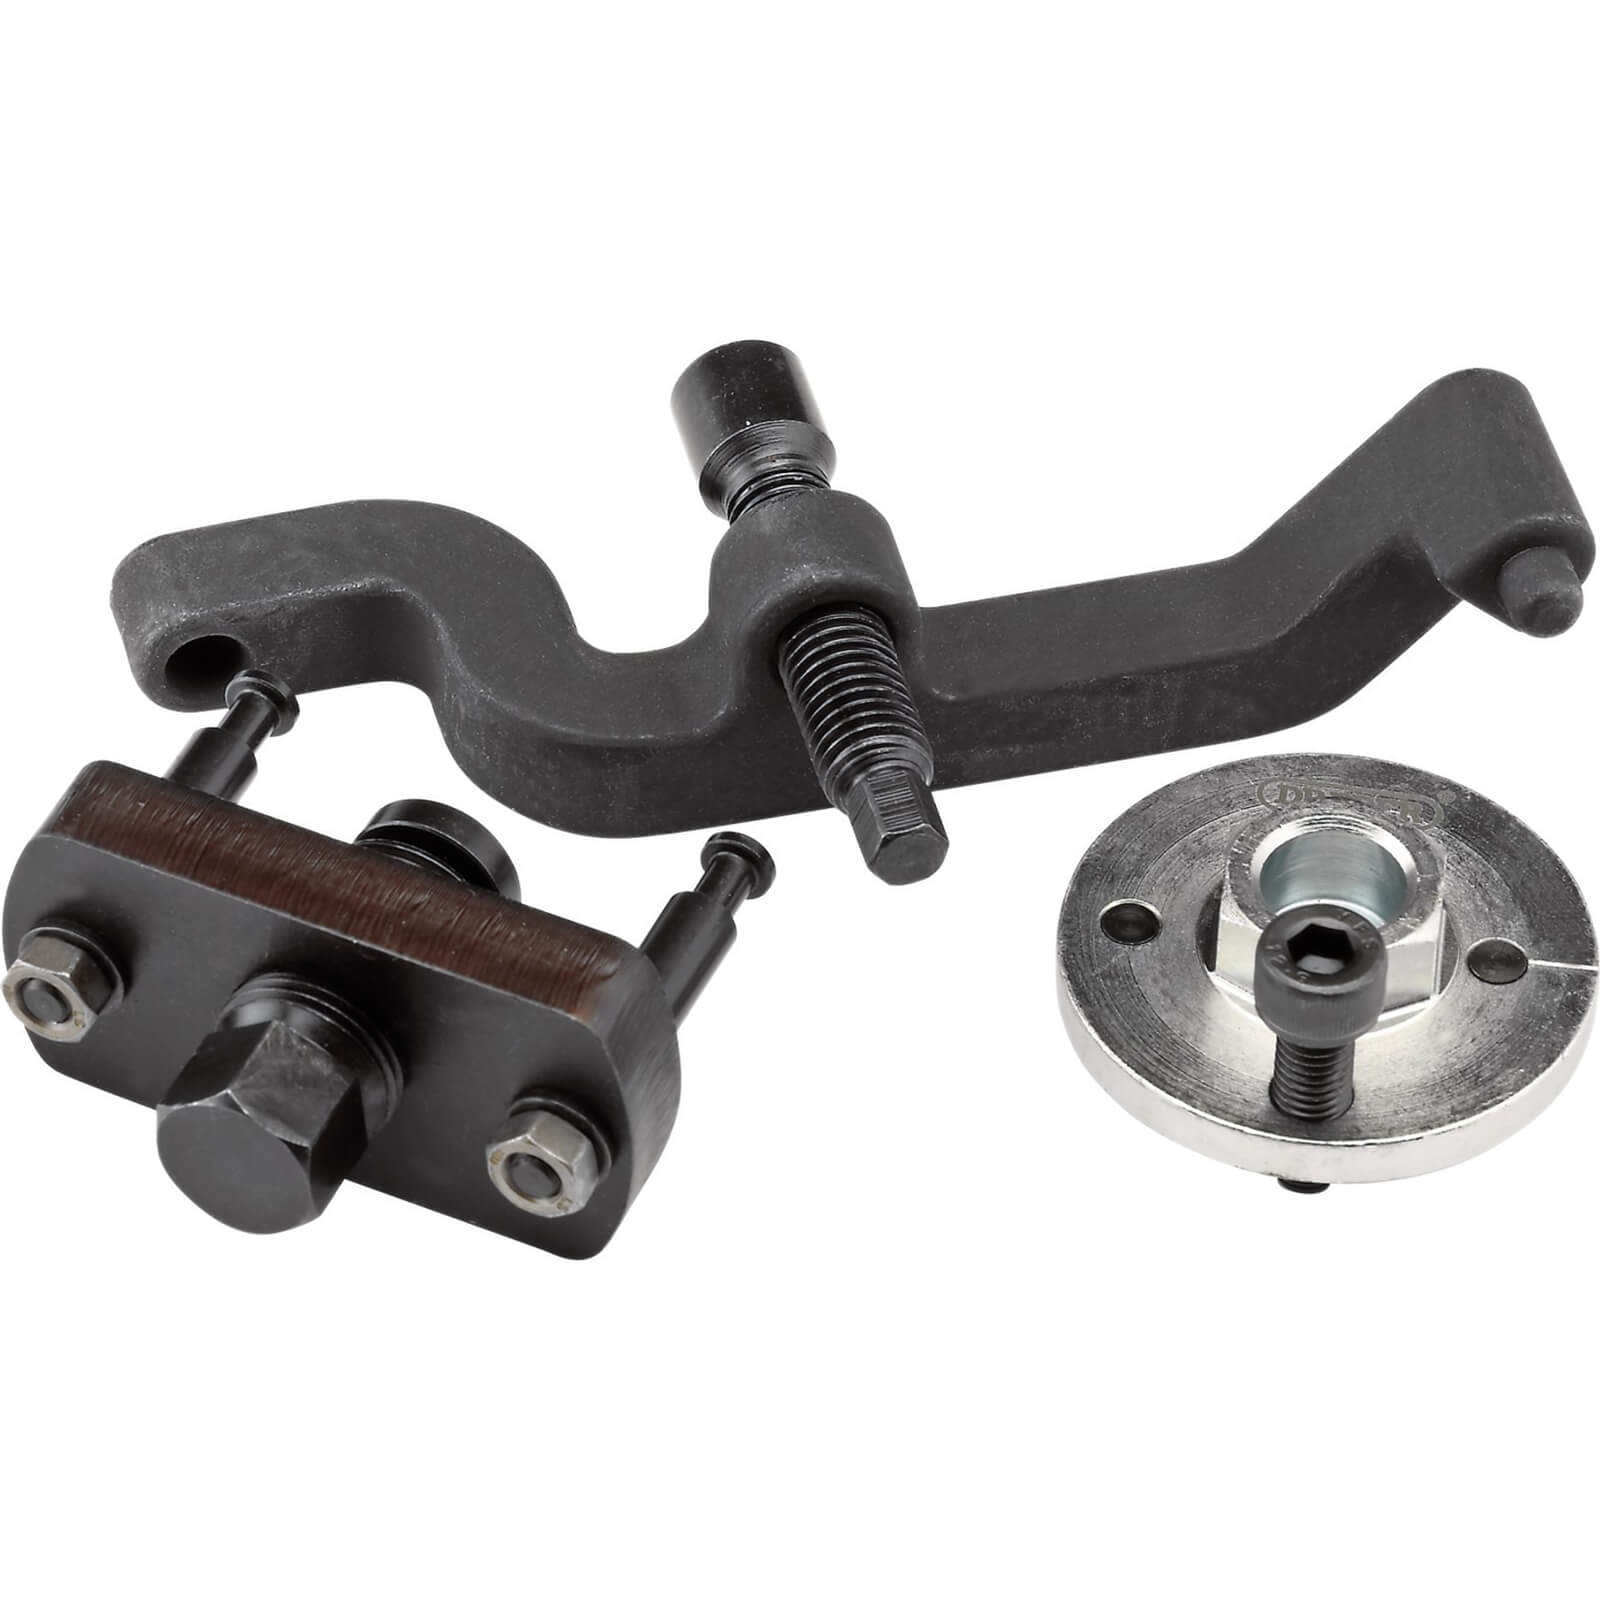 Image of Draper Water Pump Puller Kit for Volkswagen Touareg and T5 Vehicles